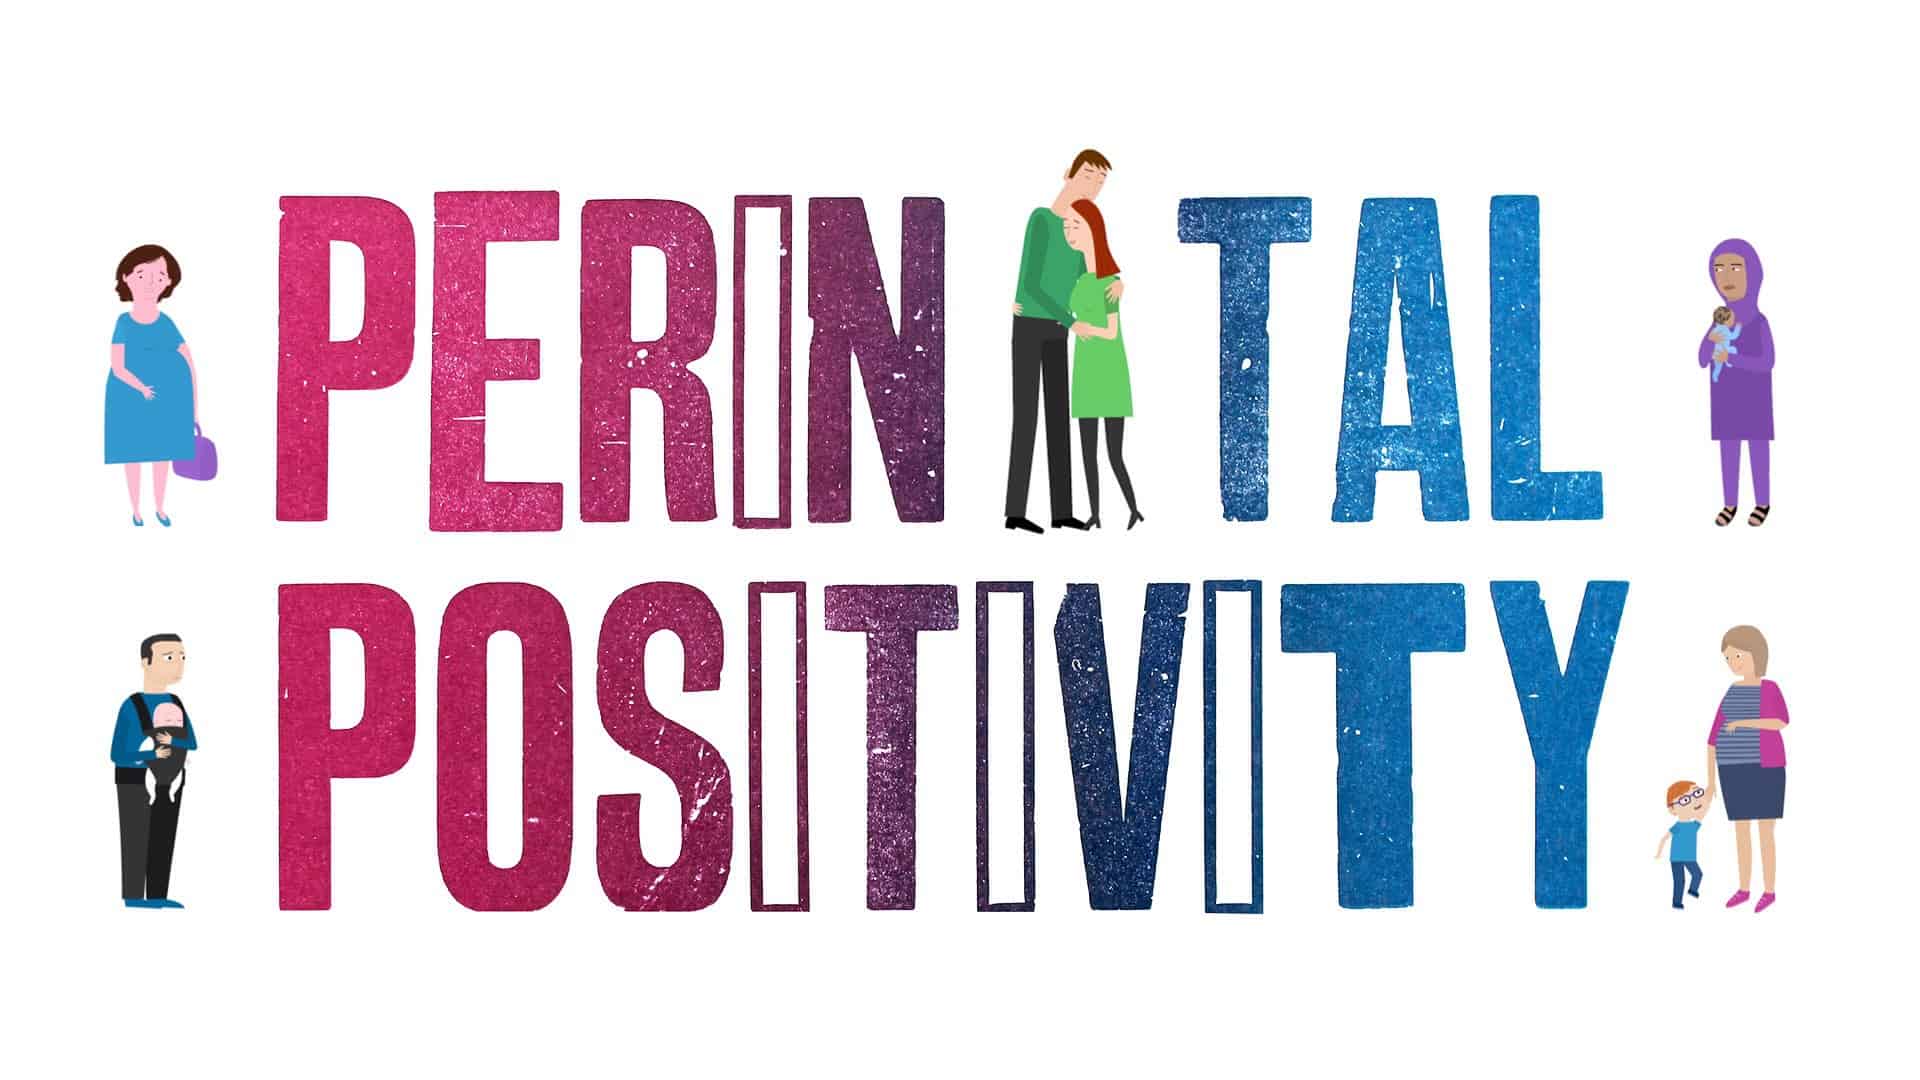 Perinatal Positivity - new film to help Health professionals talk about